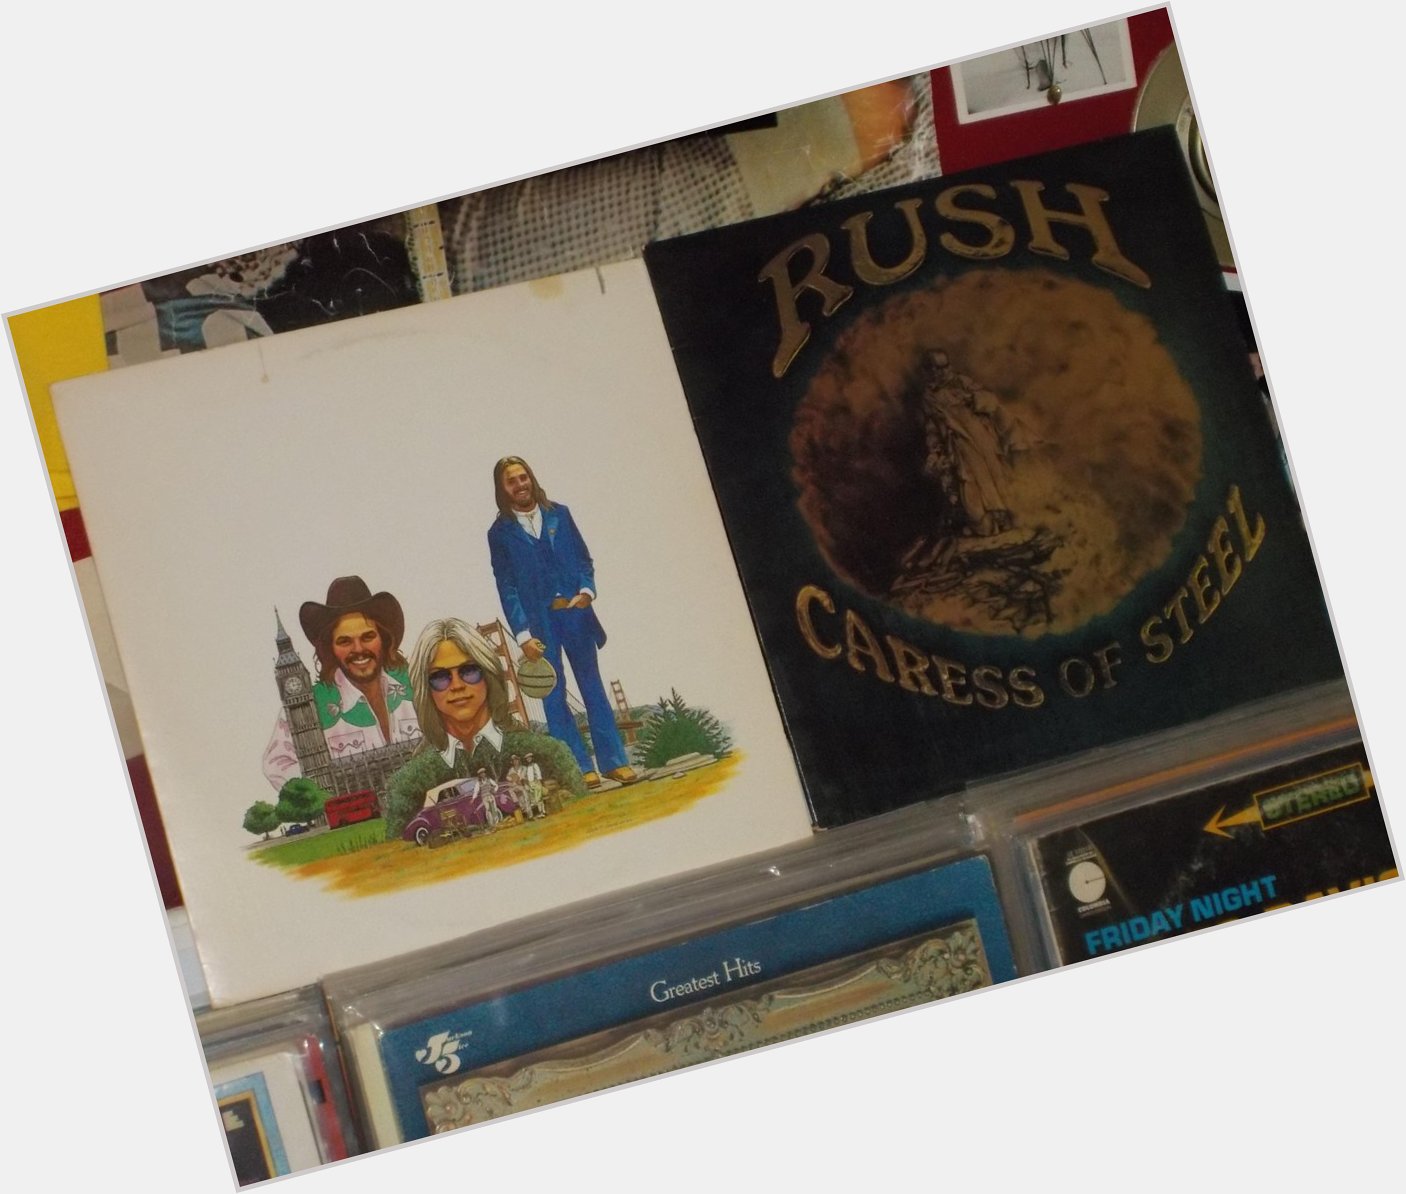 Happy Birthday to Gerry Beckley of America and Neil Peart of Rush 